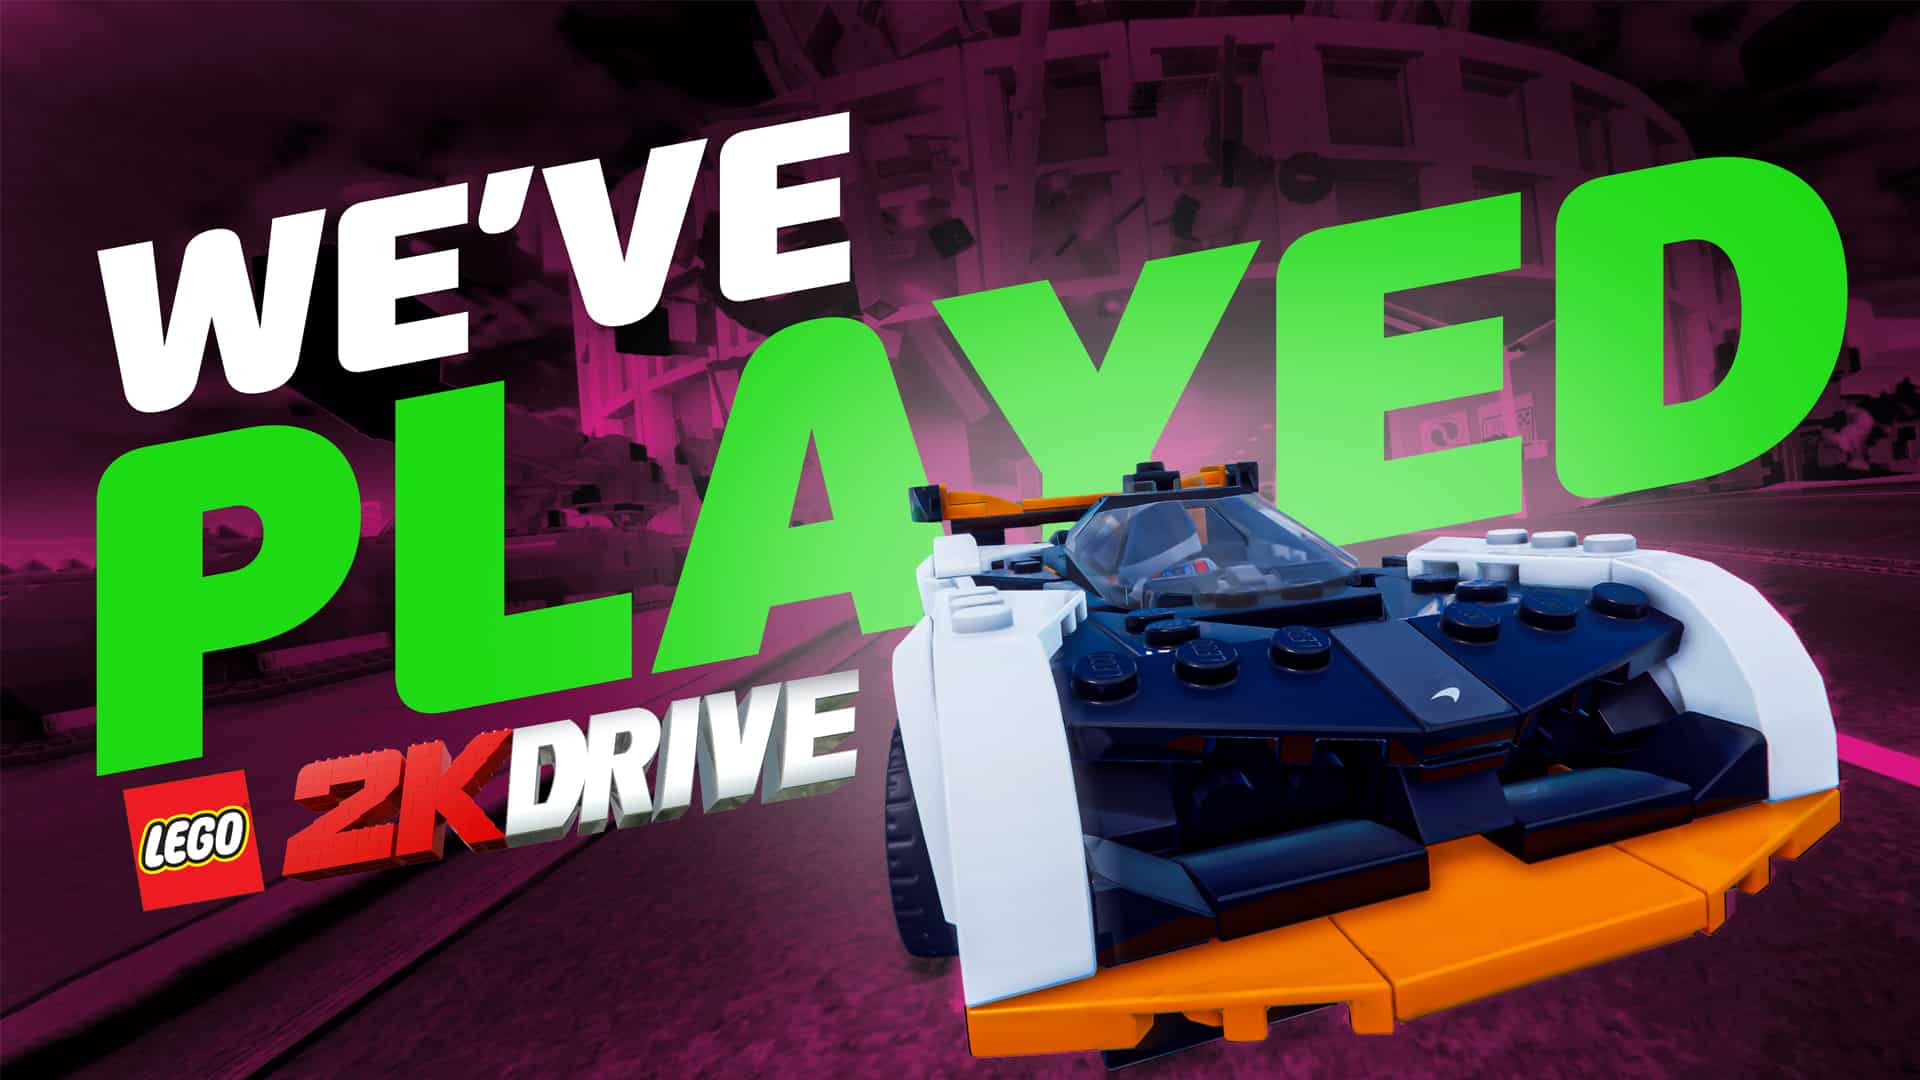 Lego 2K Drive is your family's next driving game | Traxion